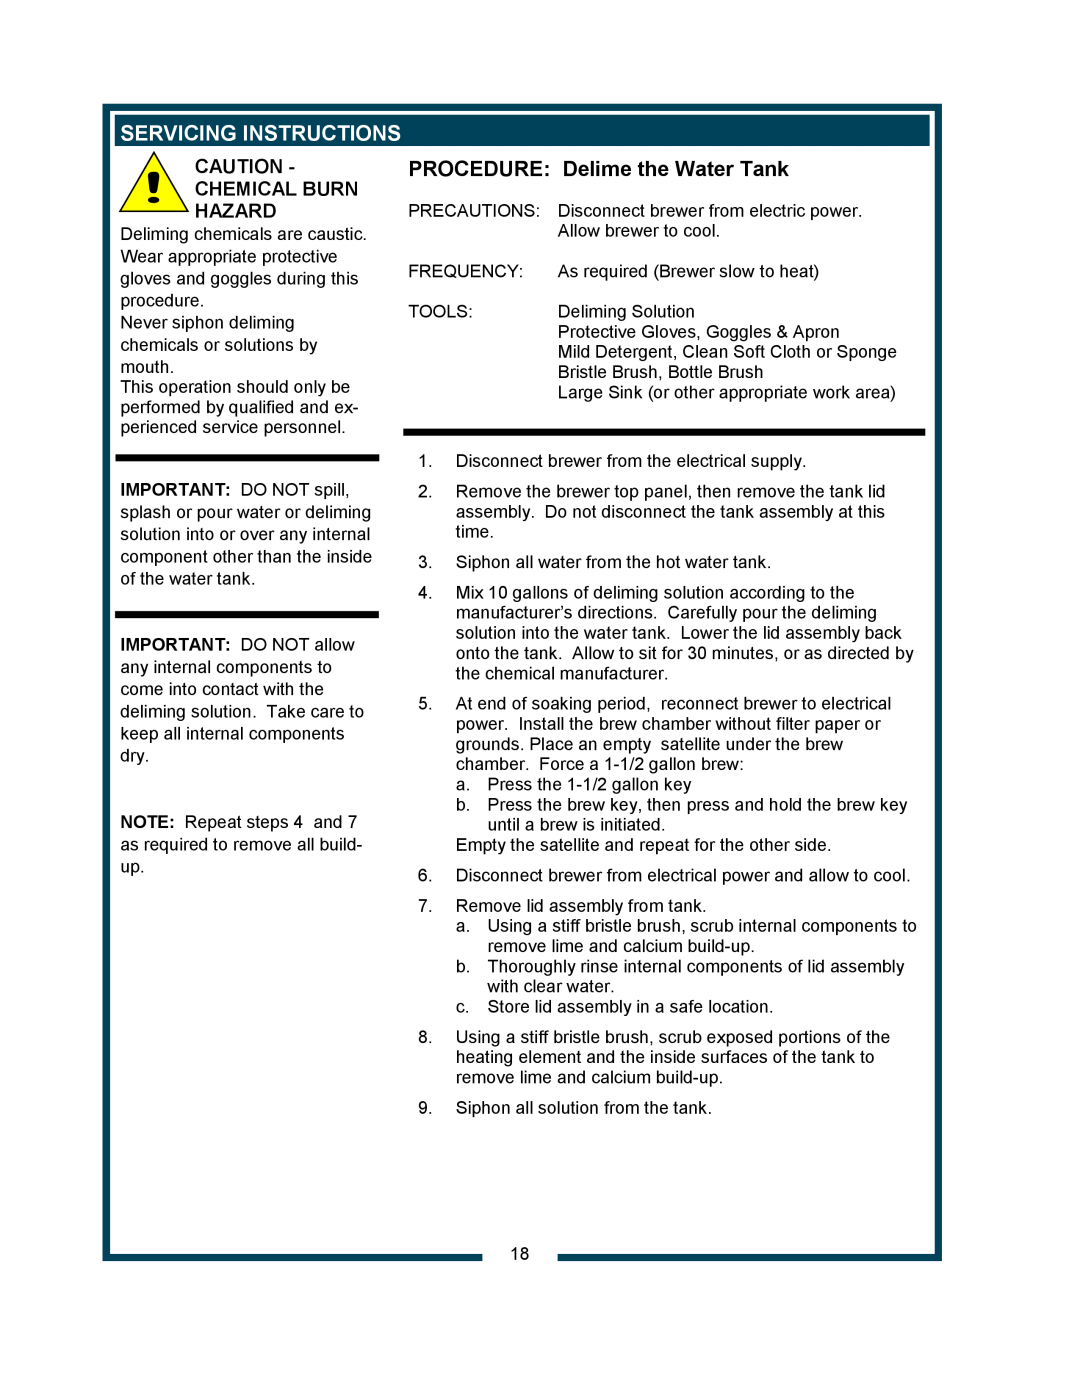 Bloomfield 9421 (SS2-HE) owner manual Servicing Instructions, PROCEDURE Delime the Water Tank, Chemical Burn Hazard 